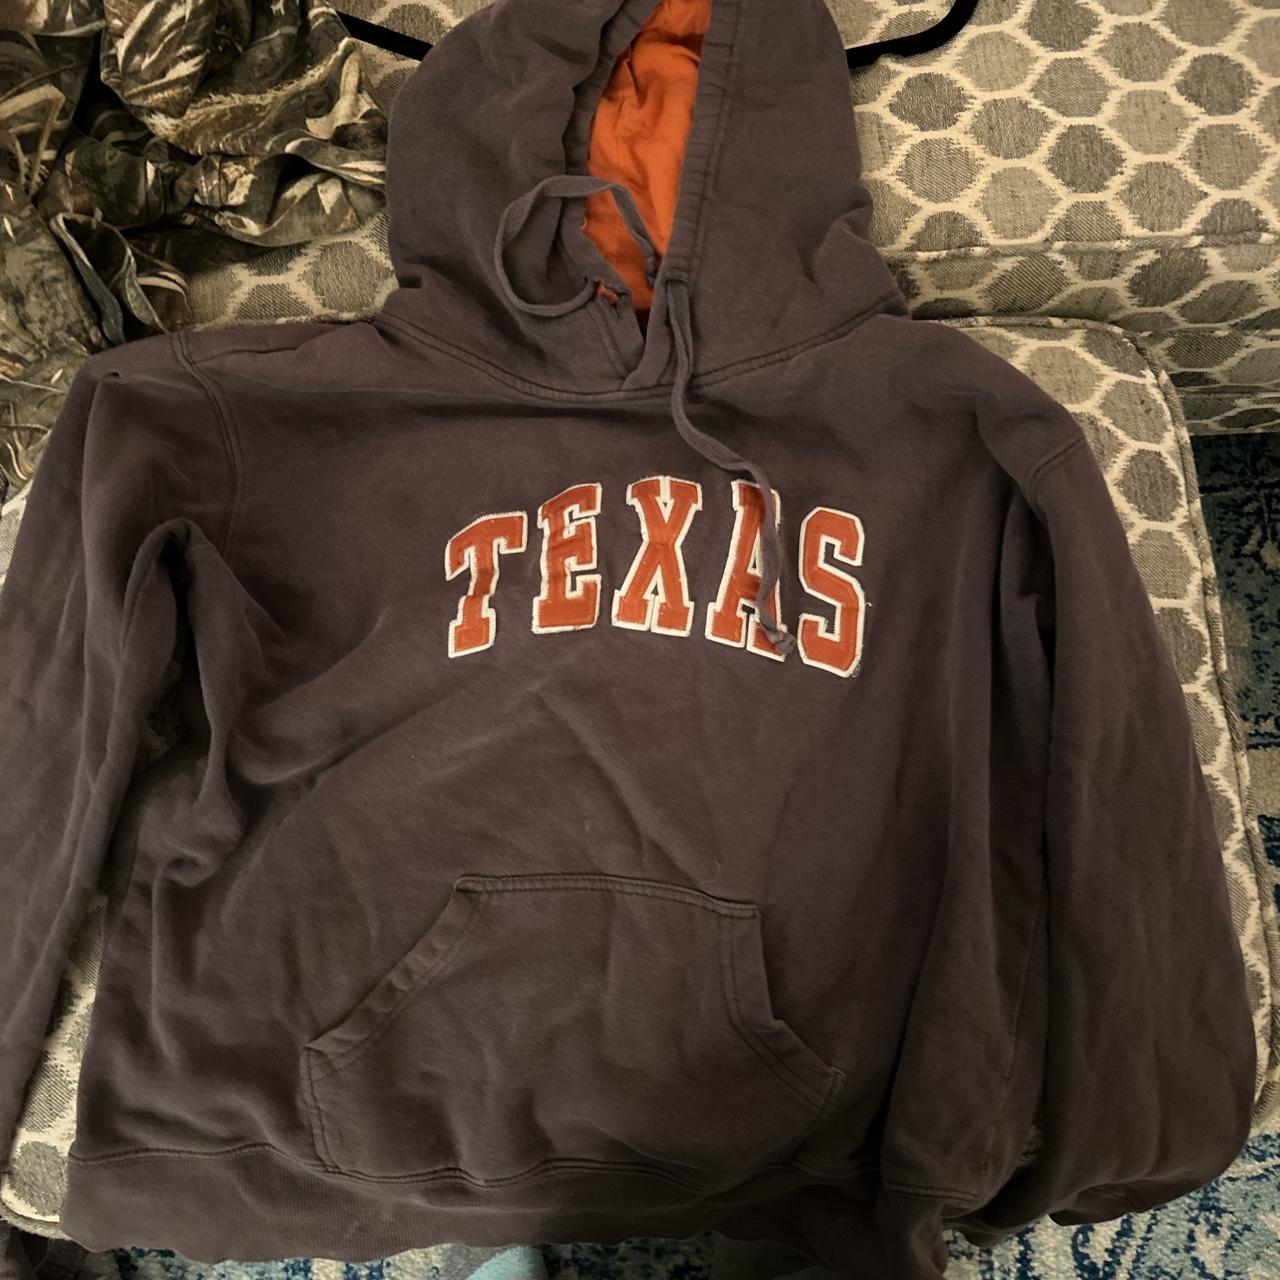 youth xl texas hoodie. good condition #texas... - Depop